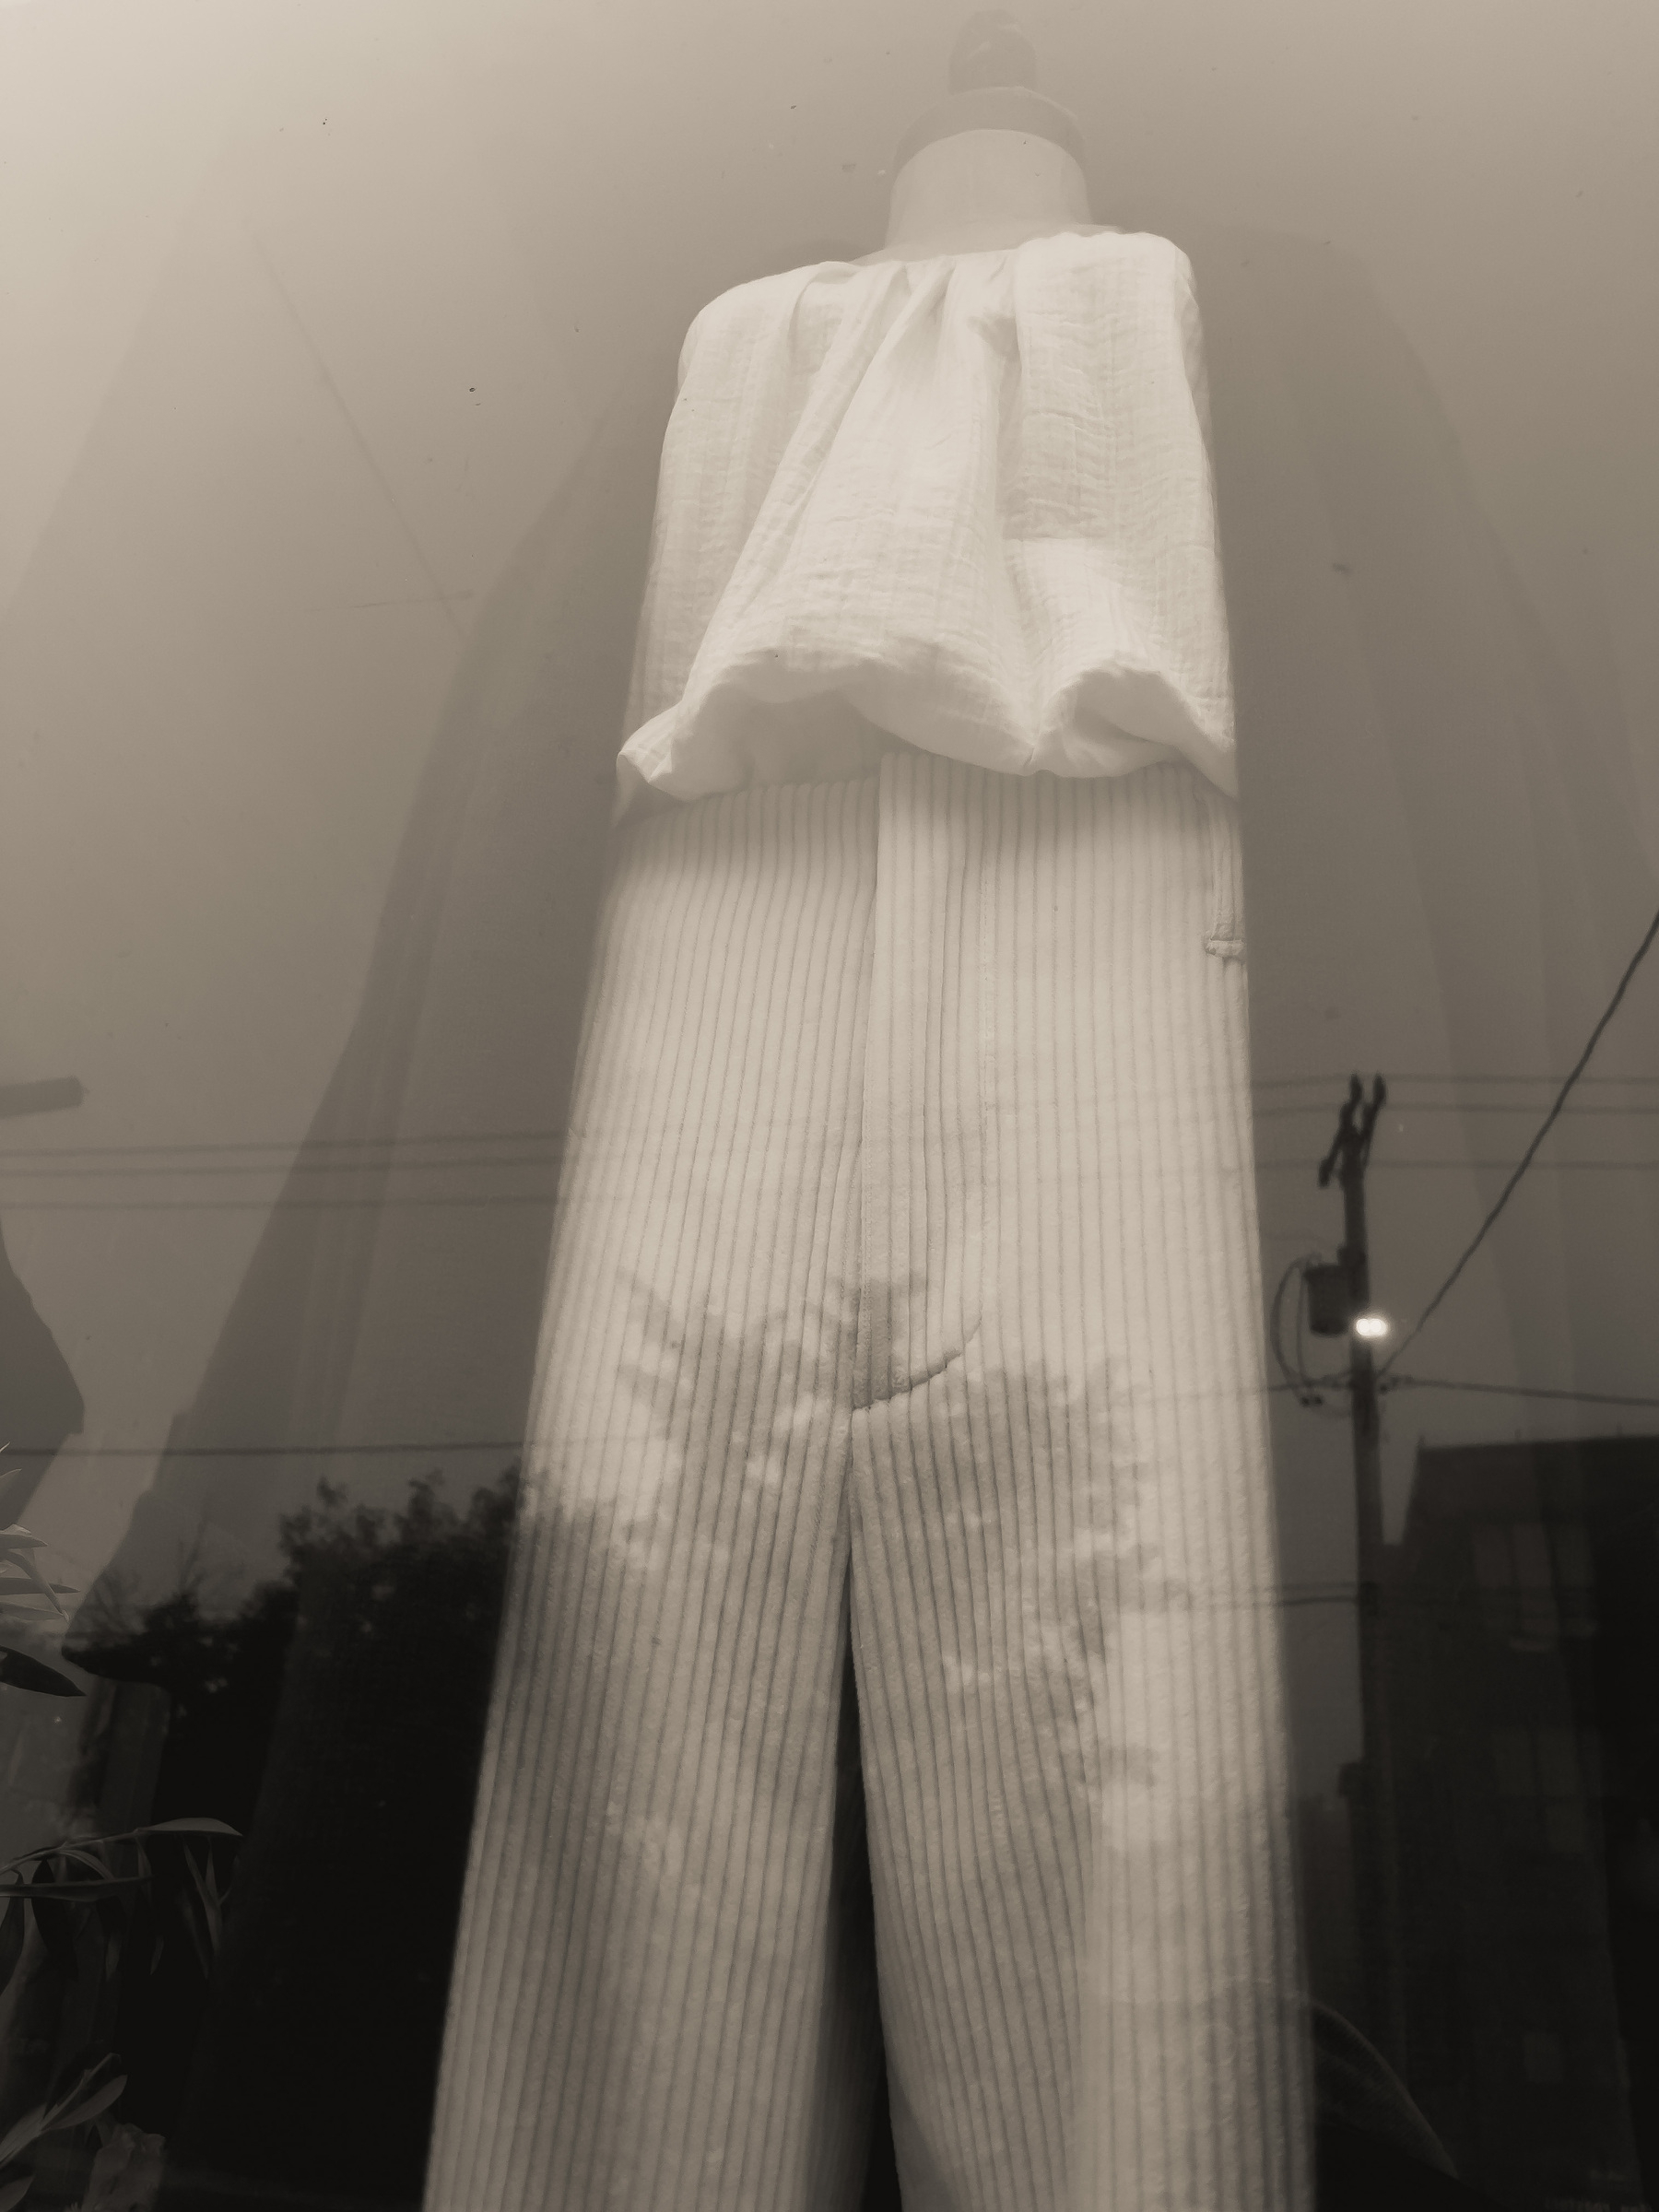 Blouse, pants and long coat on mannequin in shop window.